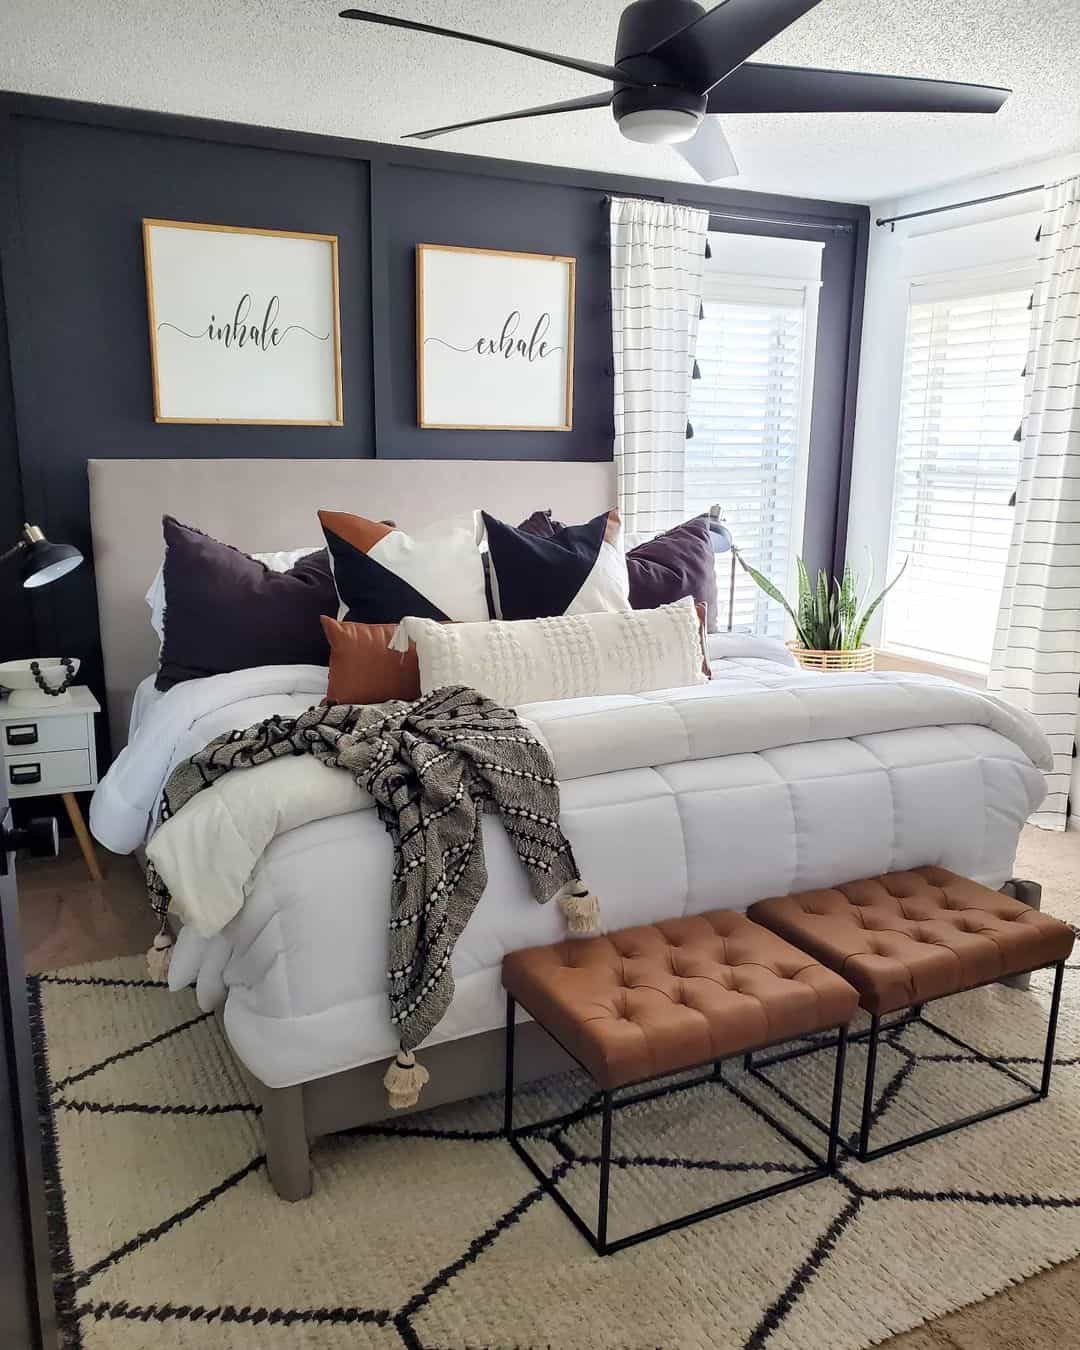 28 Leather Throw Pillows That Add a Luxurious Touch